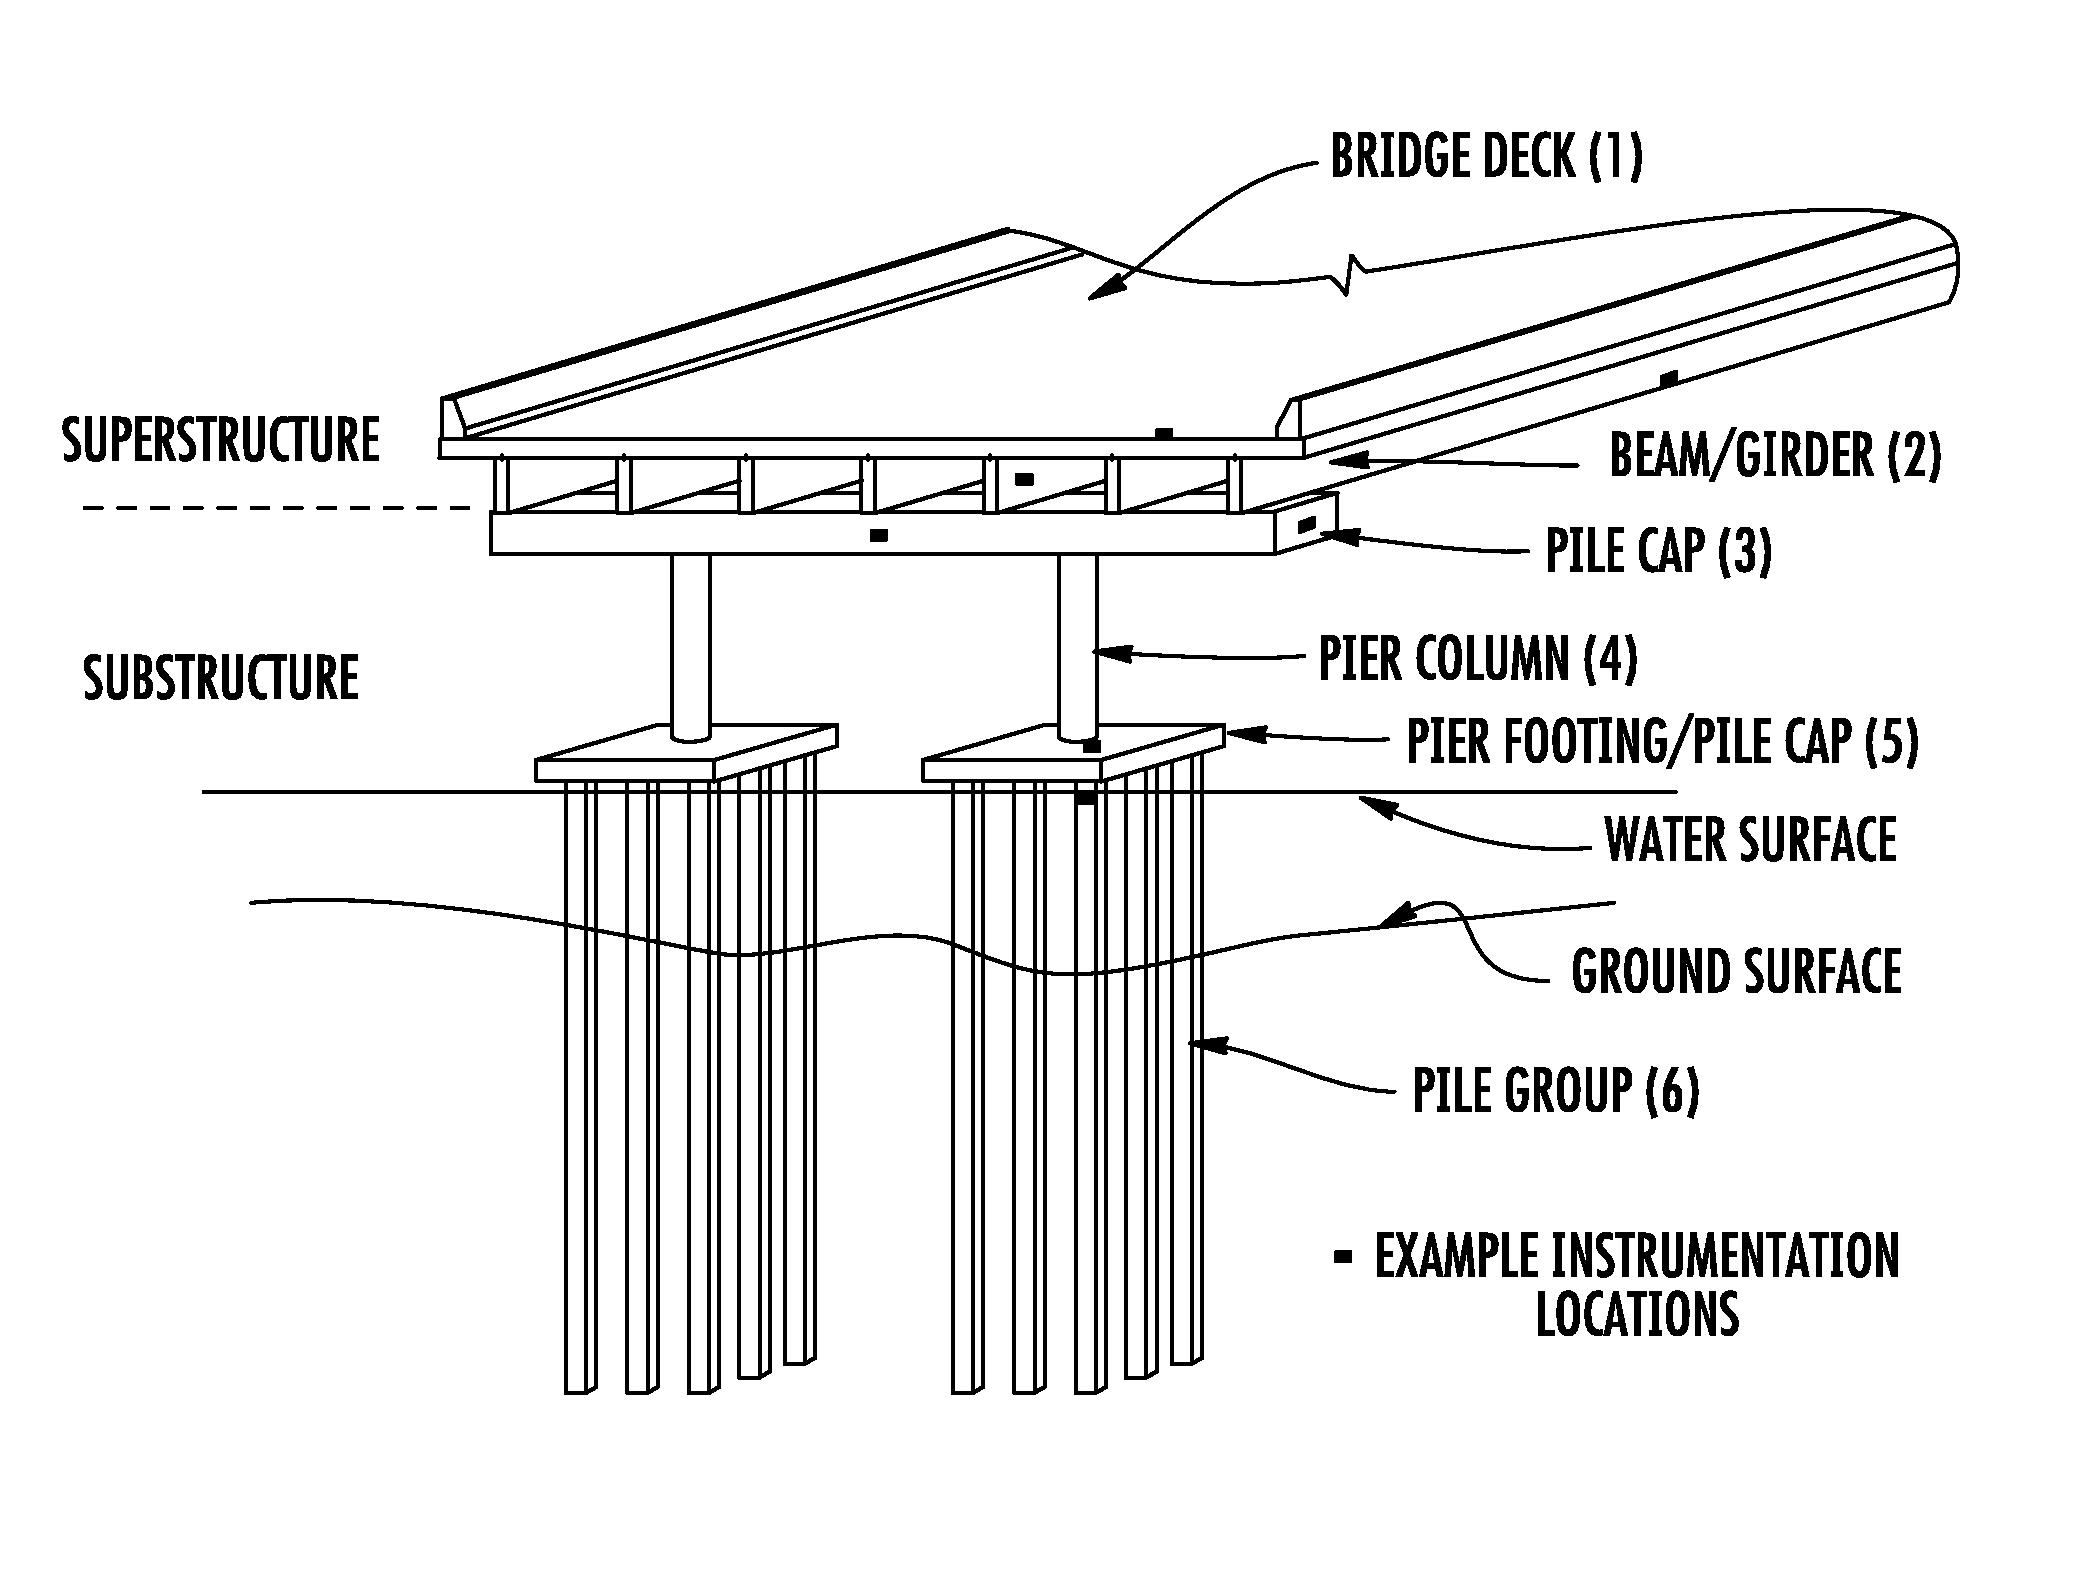 Load rating of bridges, including substructure